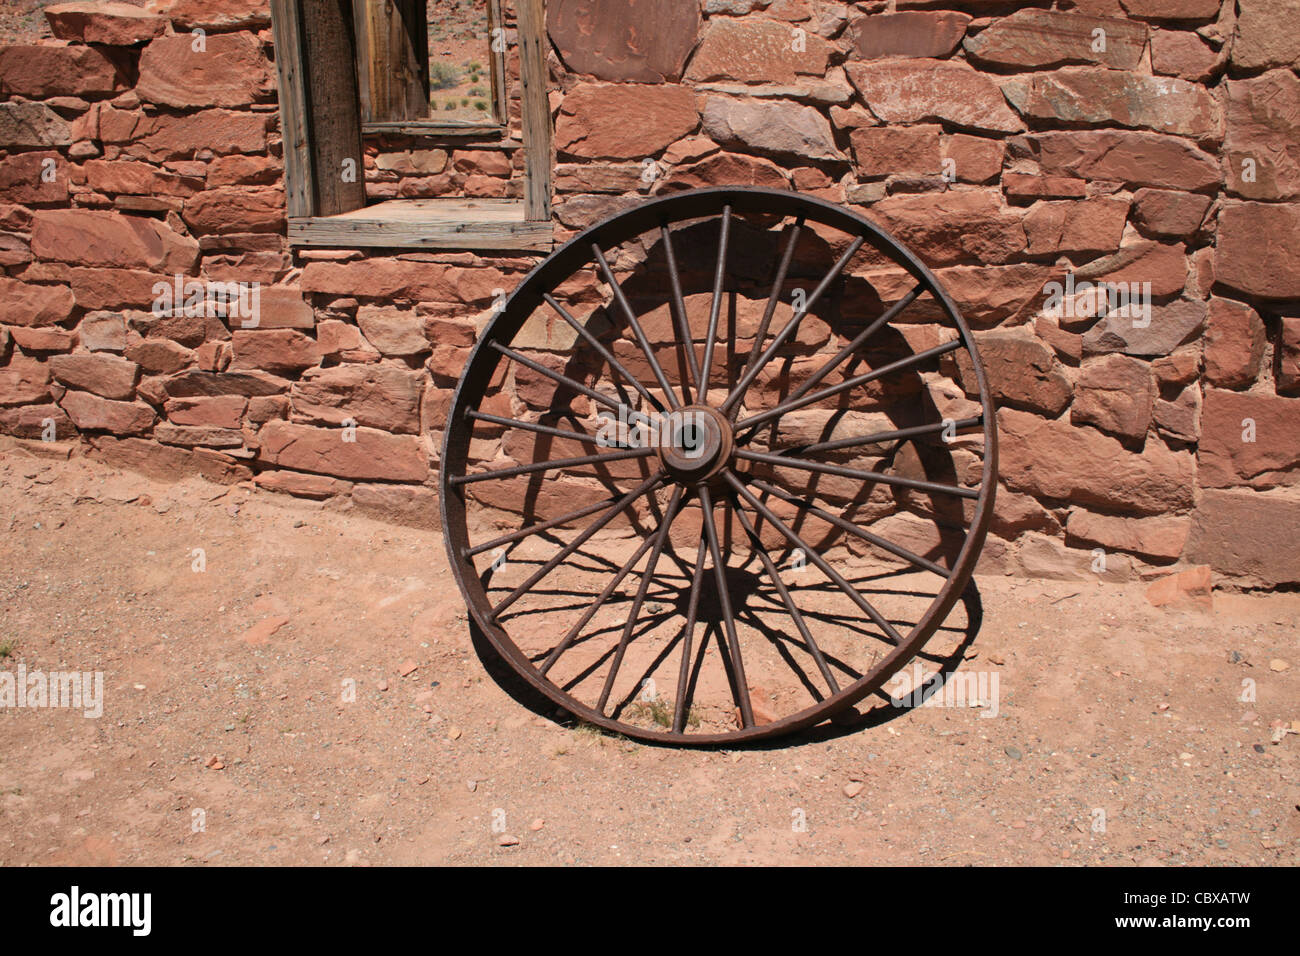 antique iron wheel leans against a stone wall at Lees Ferry , Arizona Stock Photo